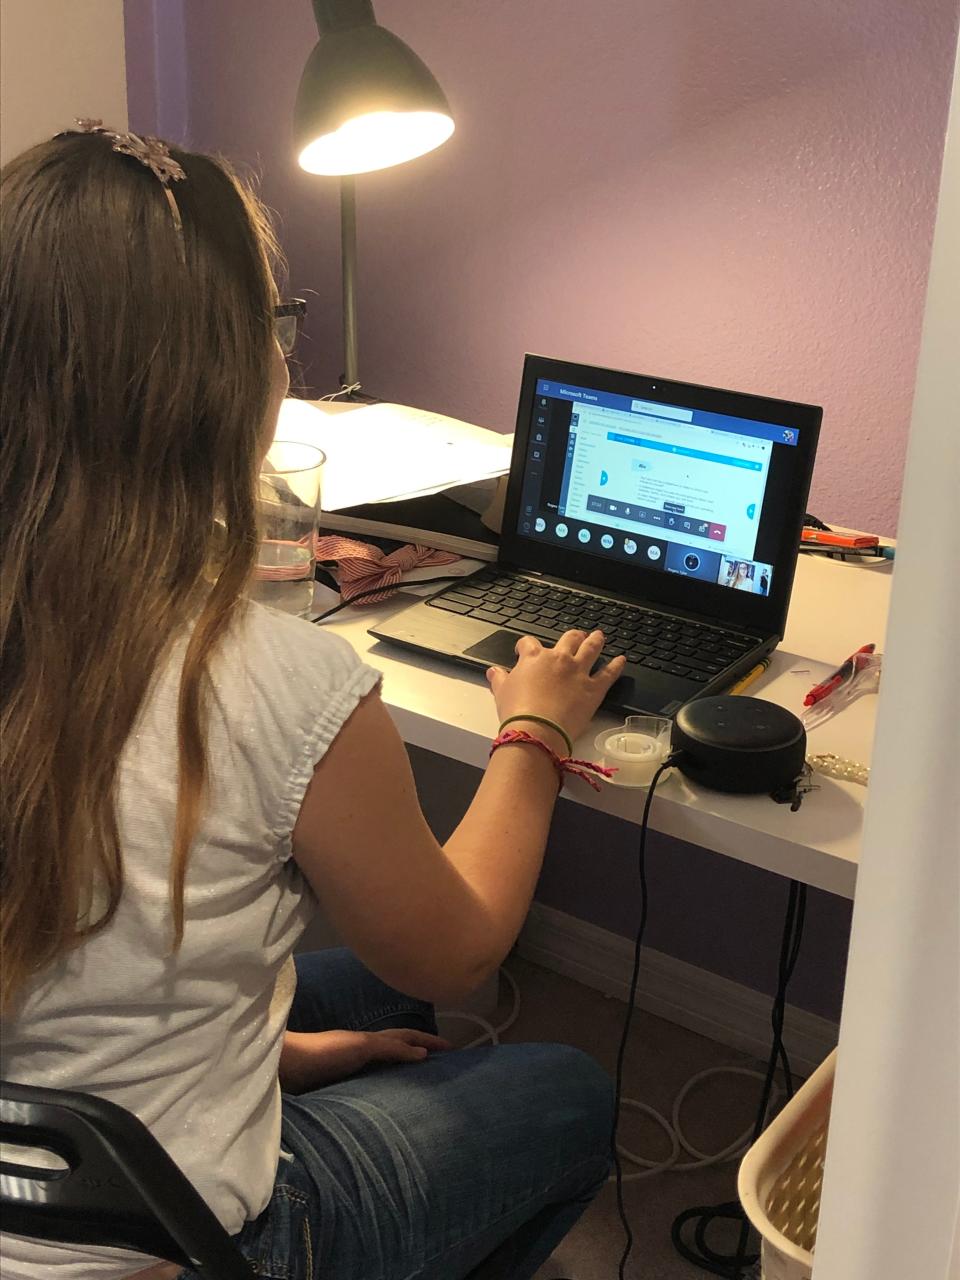 Amanda Loeffler, a parent in Pinellas County, Florida, opted to keep her kids in the school district’s remote learning program this fall because of the coronavirus. But teachers are trying to educate the kids who have stayed home and those who are taking classes in person simultaneously, which has meant that students like her daughter, Rainey (pictured), are receiving very little instruction.